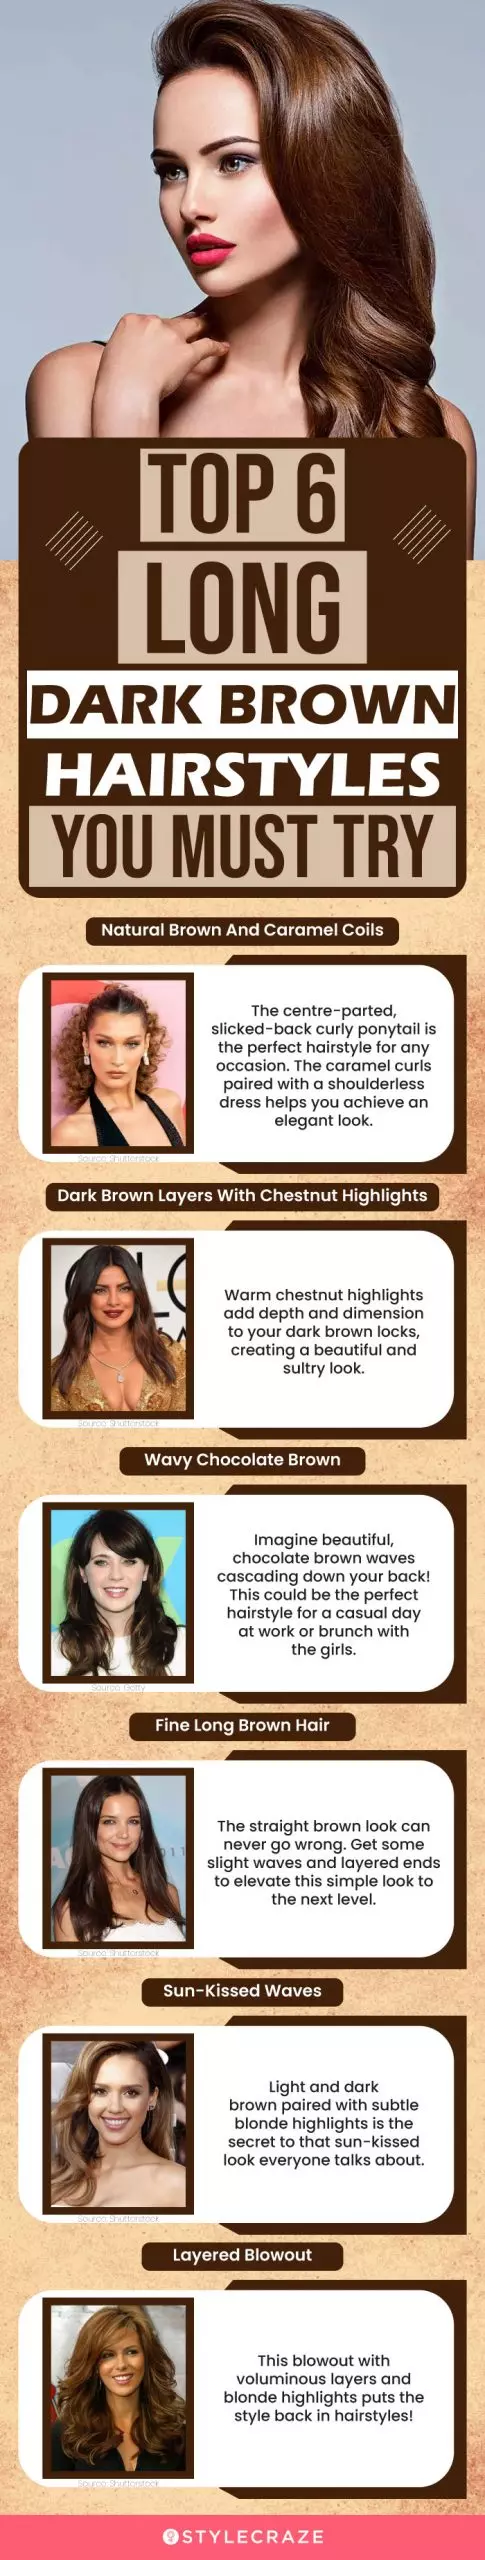 top 6 long dark brown hairstyles you must try (infographic)